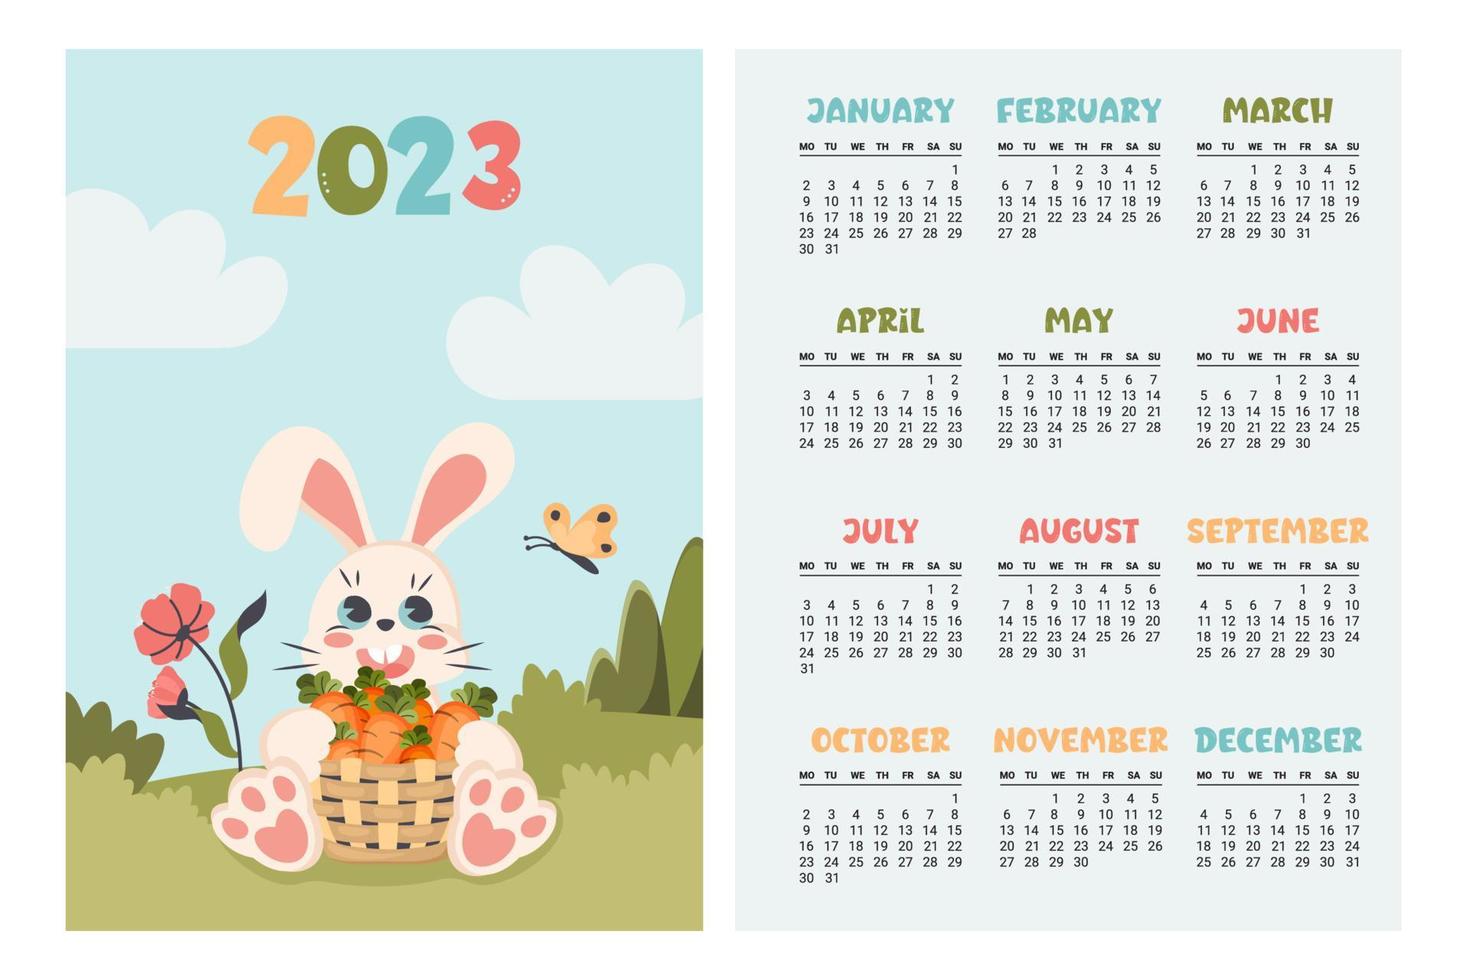 Calendar 2023. Vertical planner with cute bunny in different seasons.  Cartoon character rabbit  as symbol of new year. Week starts on Monday. Vector flat illustration